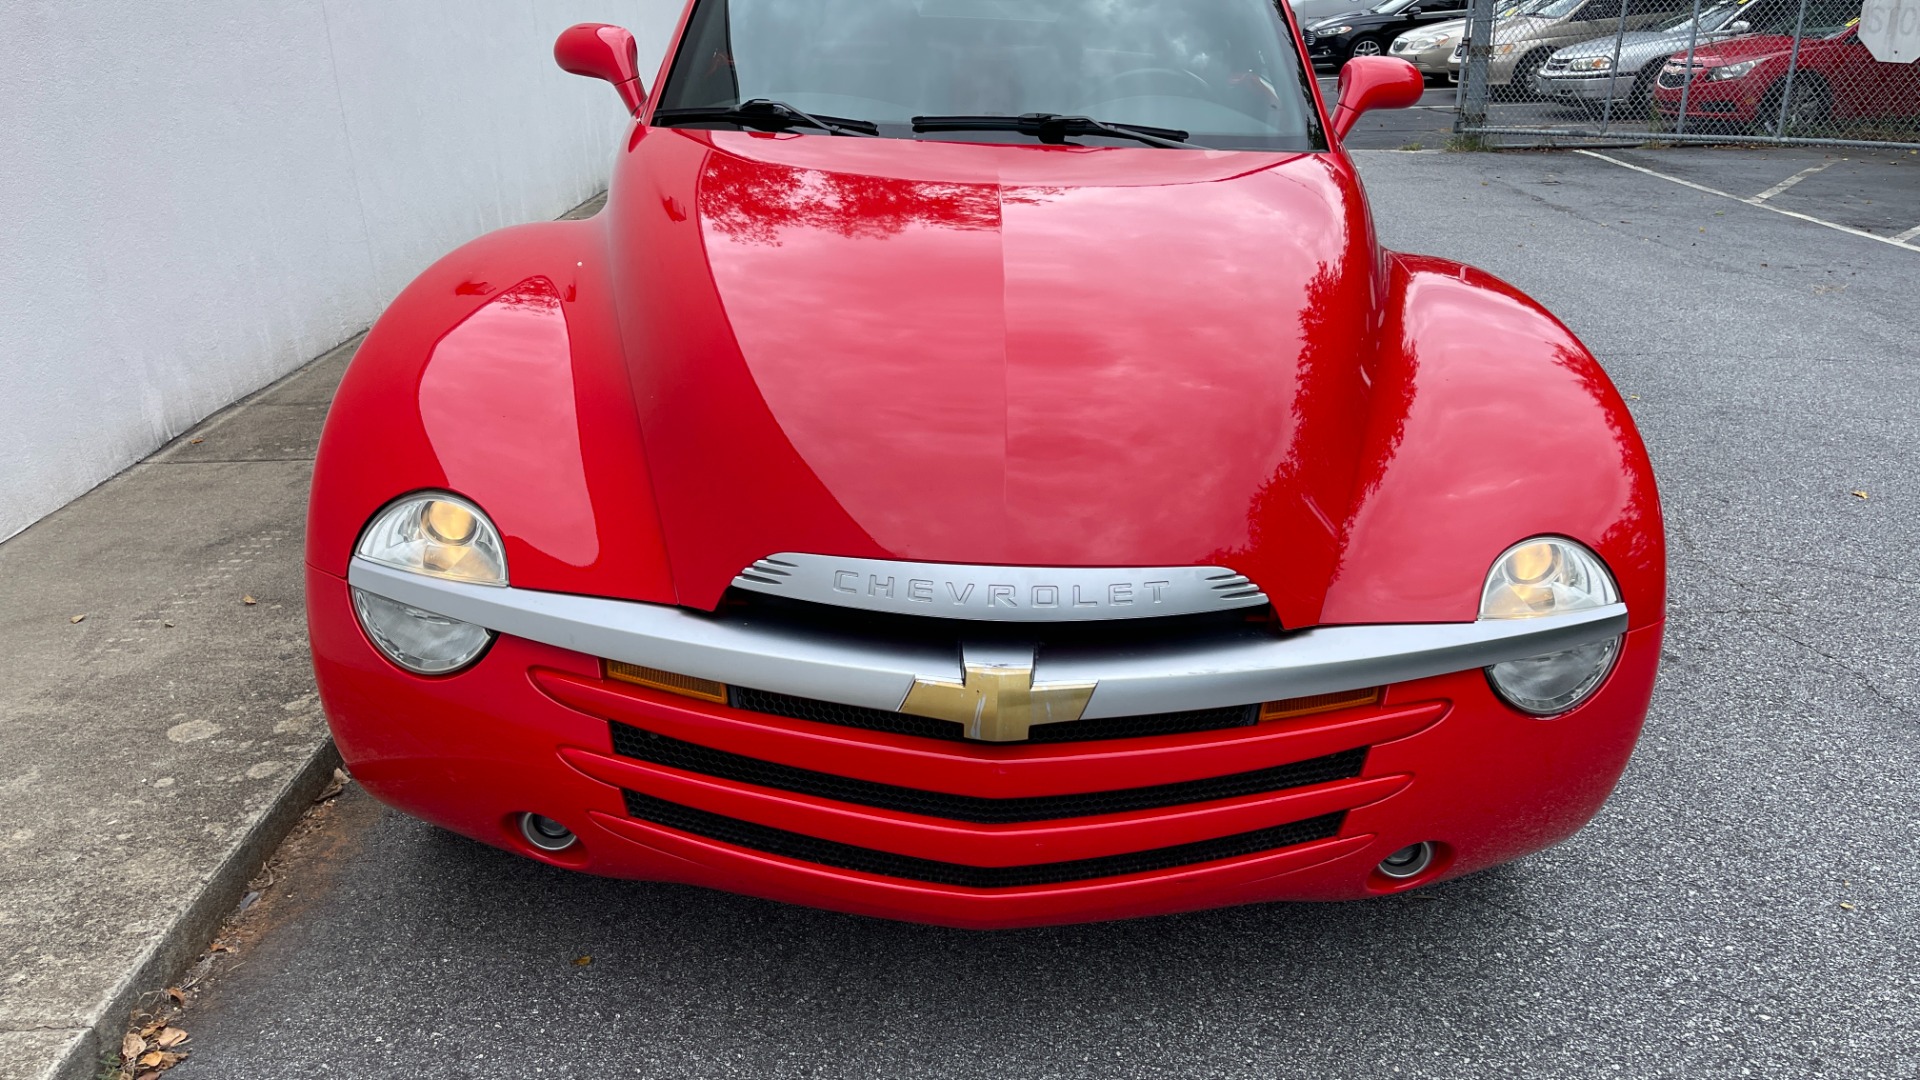 Used 2004 Chevrolet SSR LS / CONVERTIBLE / 5.3L V8 / LEATHER / HEATED SEATS / BACKUP CAMERA for sale $19,995 at Formula Imports in Charlotte NC 28227 38